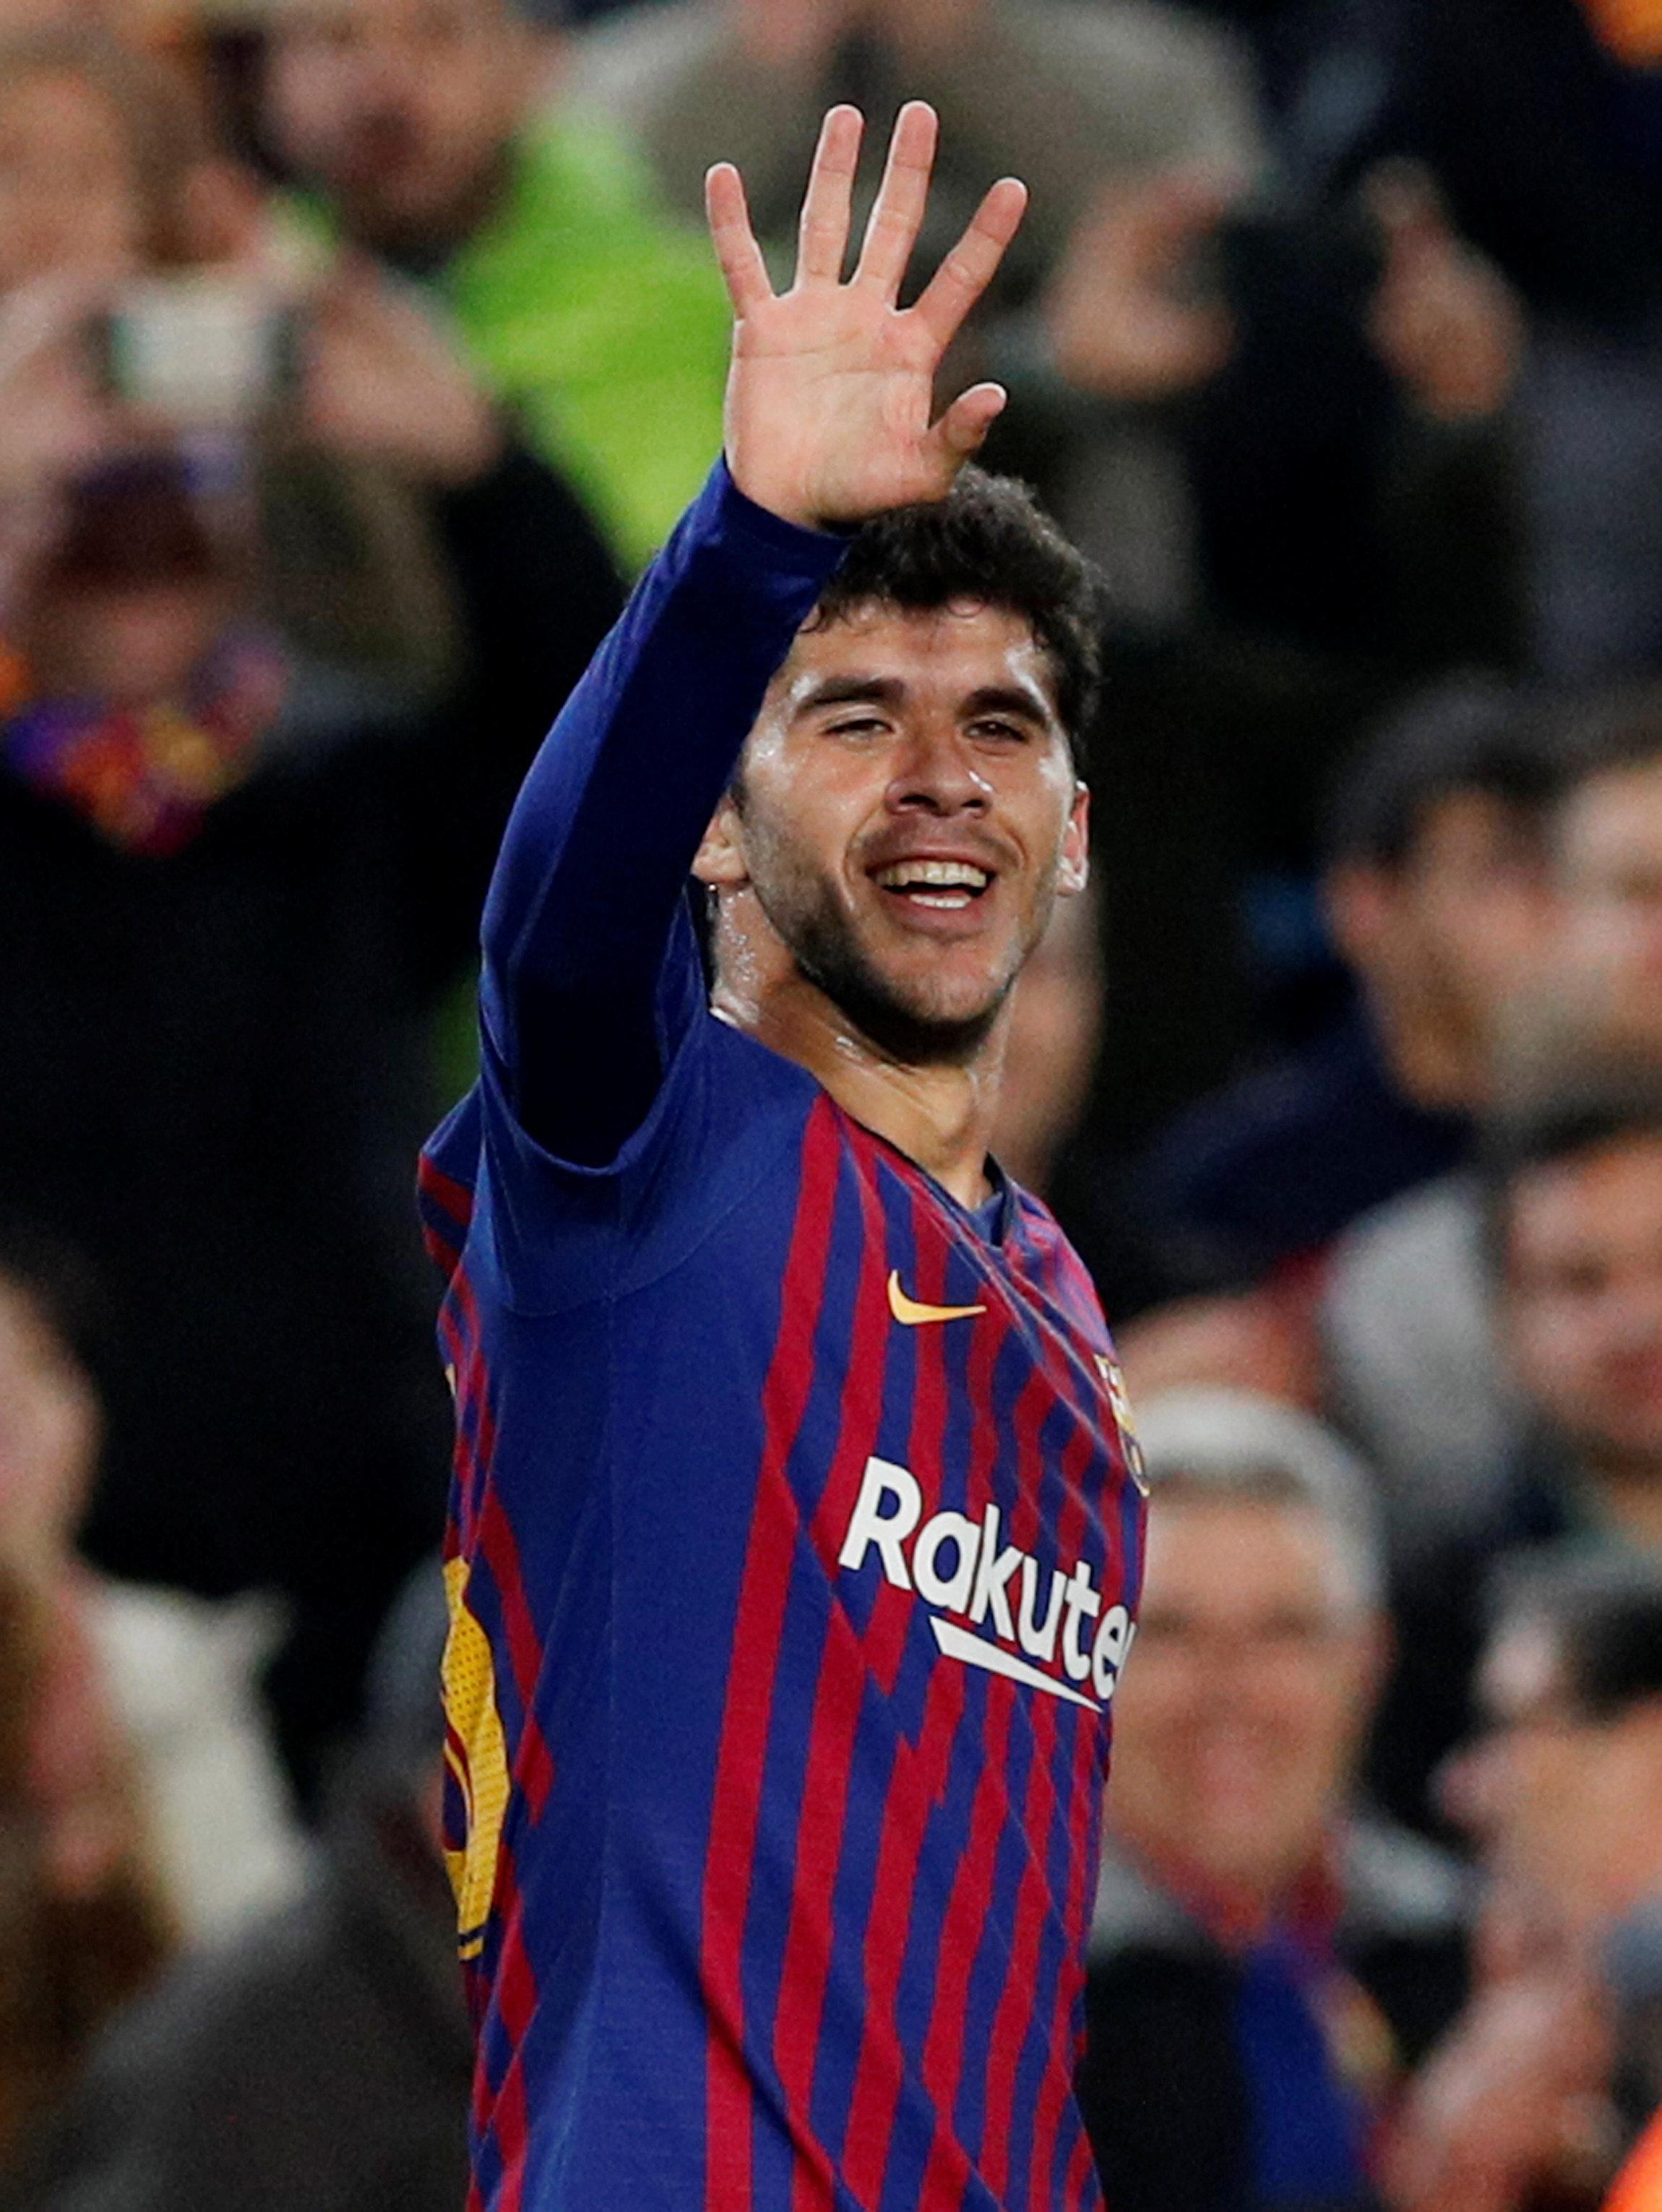 Barcelona have promoted wonderkid Carles Alena to the first